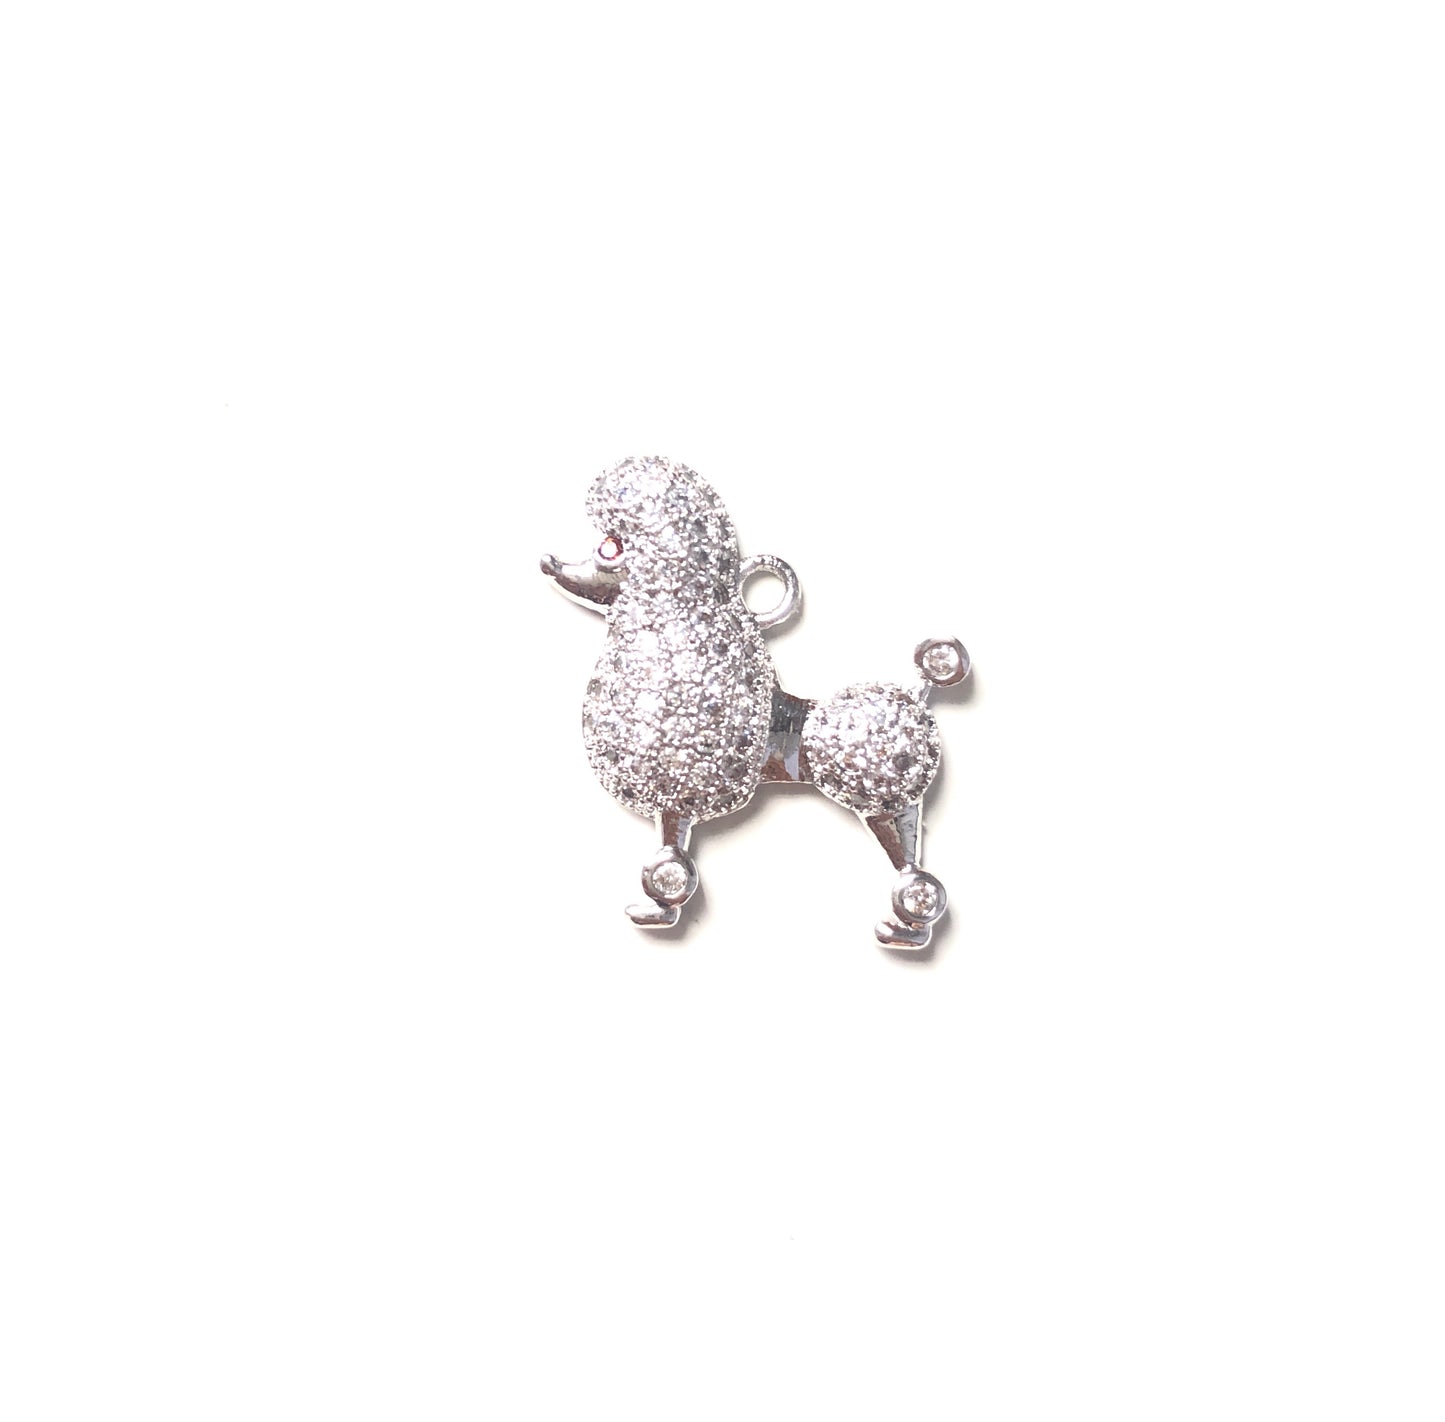 10pcs/lot 19*19mm CZ Paved Poodle Charms Silver CZ Paved Charms Animals & Insects Charms Beads Beyond